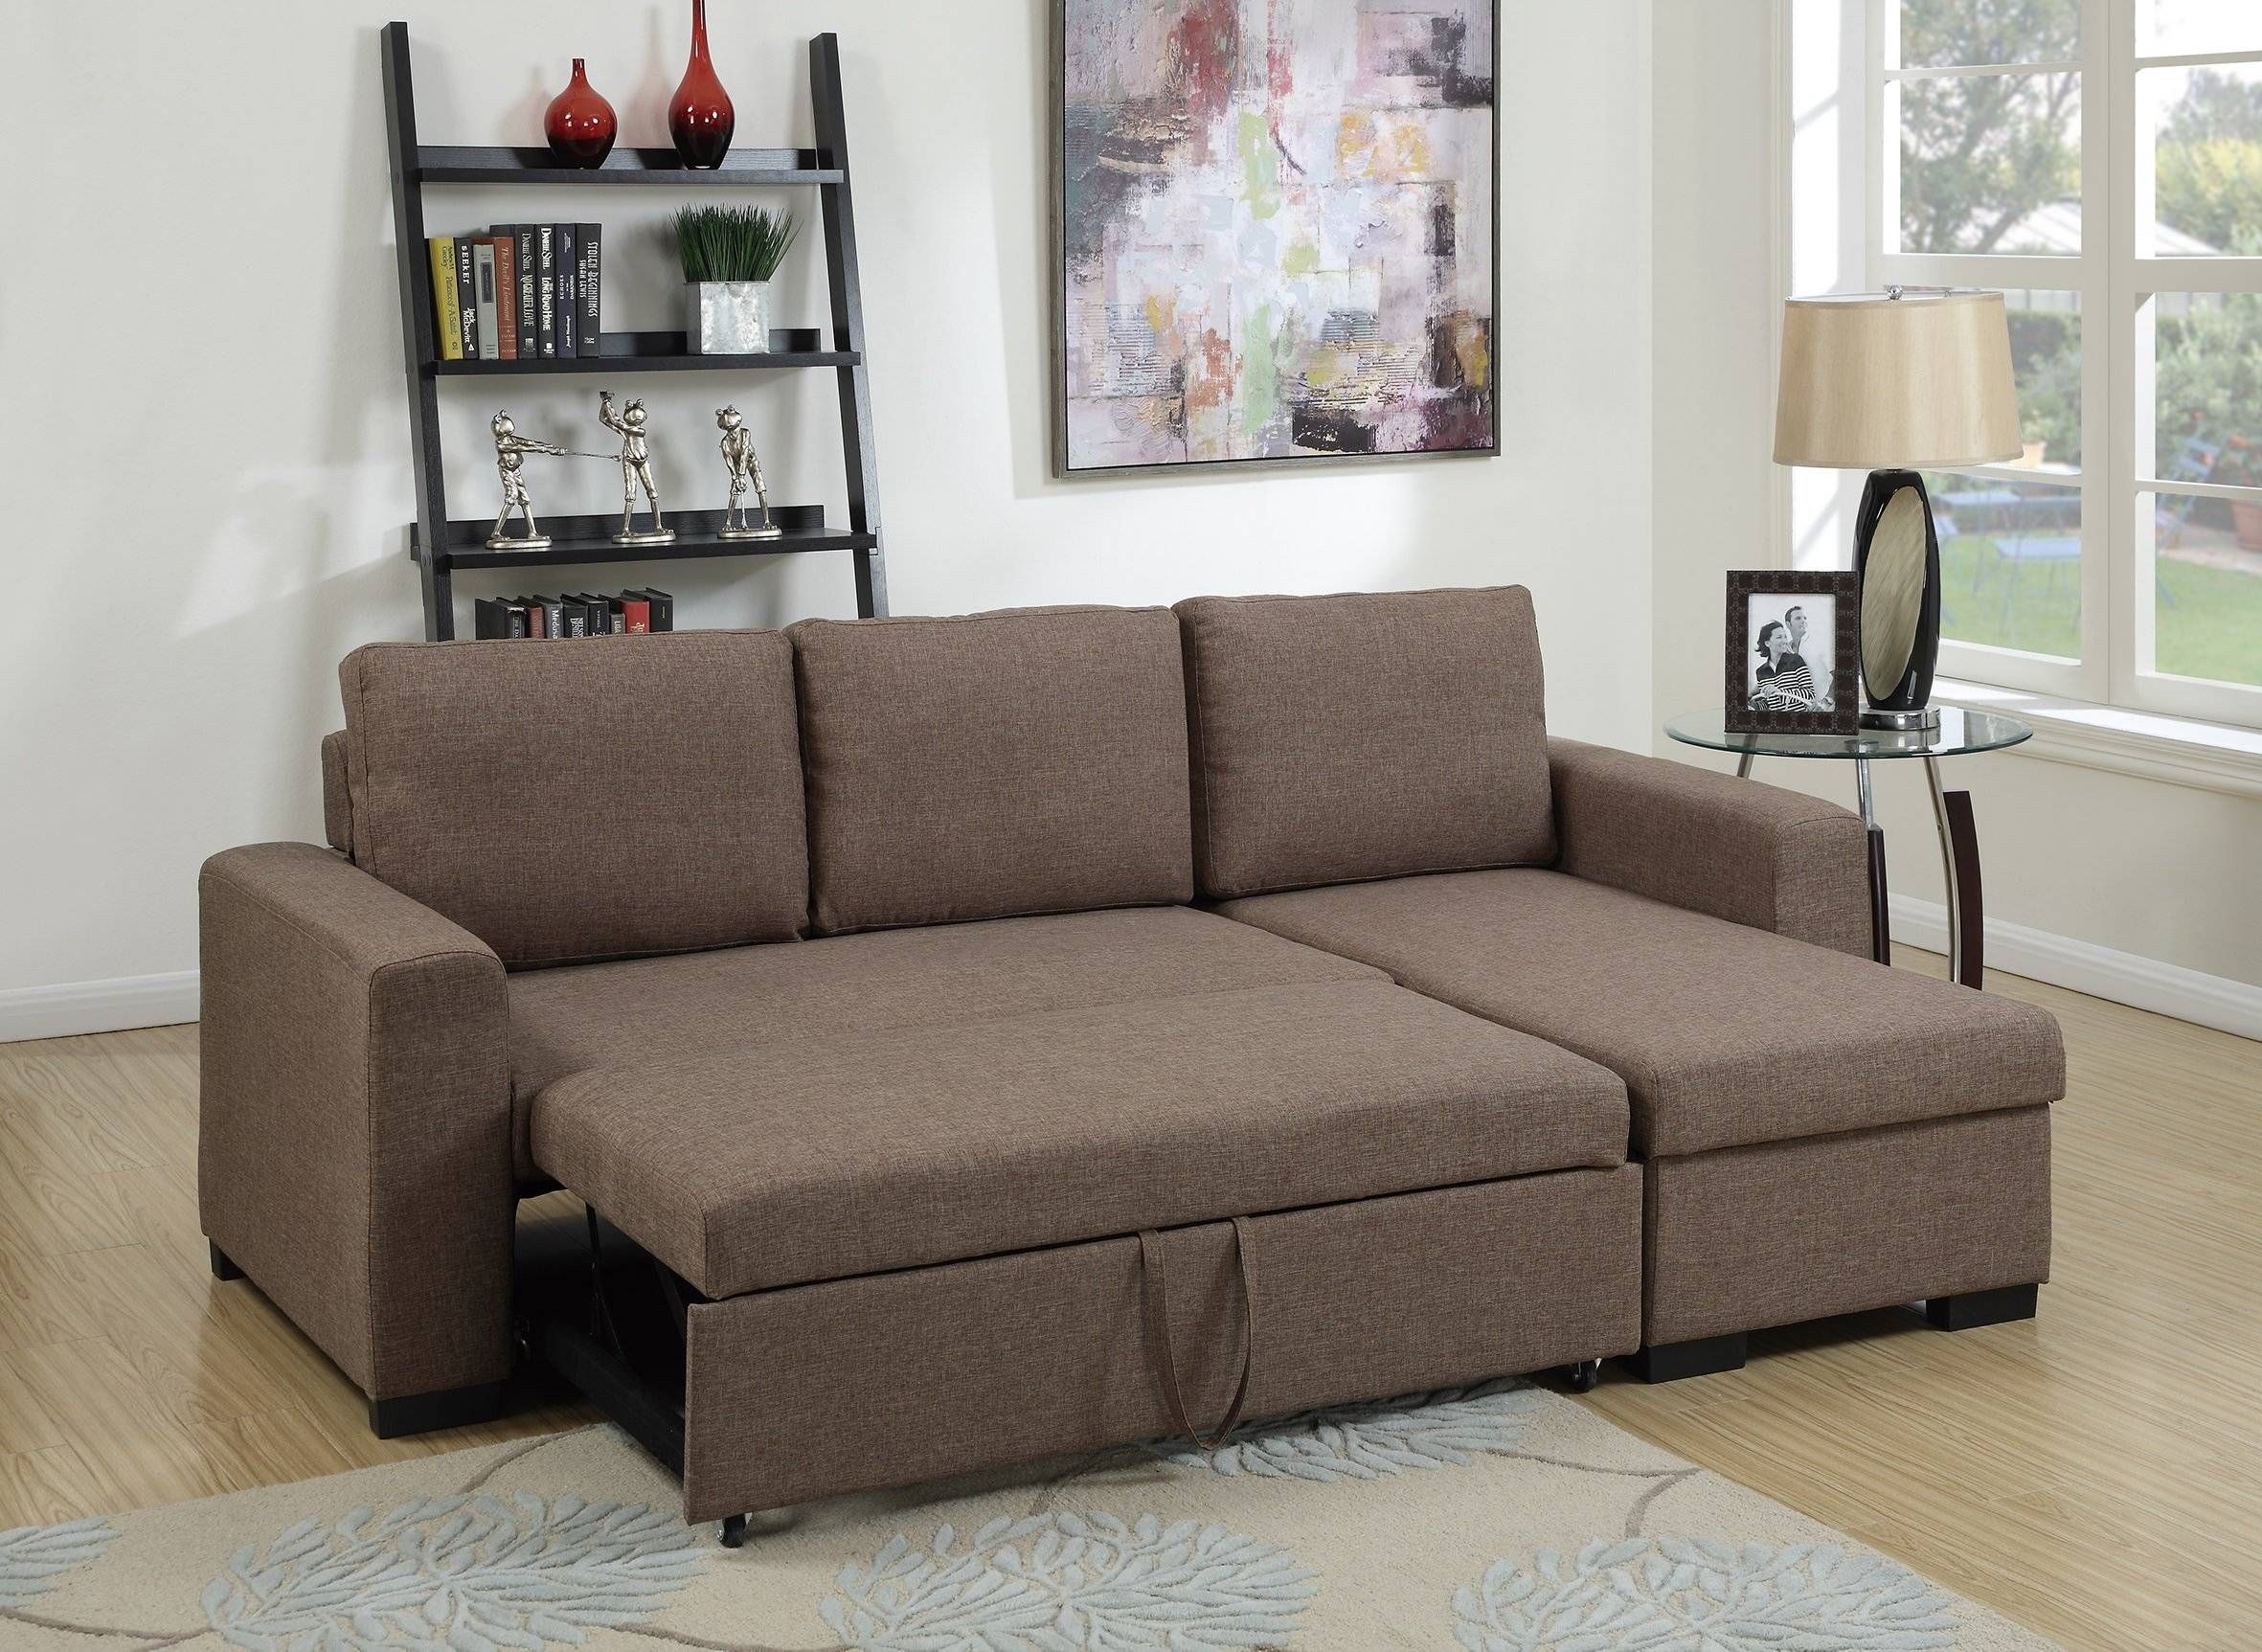 F6932 Light Coffee Convertible Sectional Sofapoundex Within Convertible Sectional Sofas (View 4 of 30)